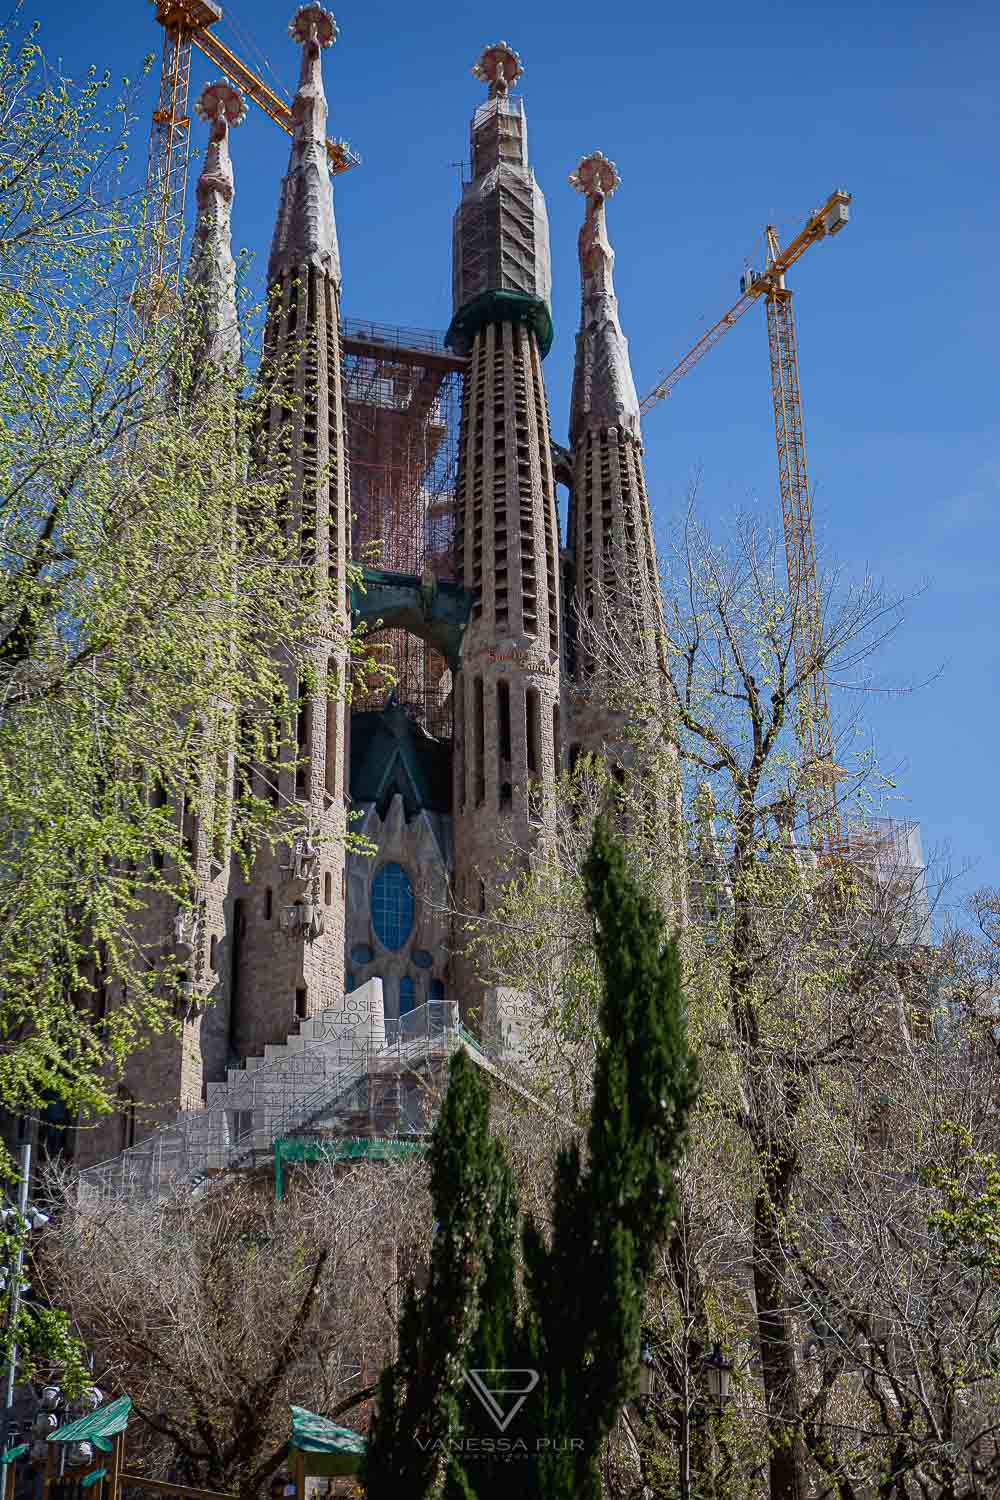 Barcelona - Sagrada Familia church - view & tips for visiting the church and basilica - Top sightseeing in Barcelona, the Sagrada Familia. Entrance fees and opening hours, views from the towers and tips for visiting - Basílica i Temple Expiatori de la Sagrada Família - How much does it cost to climb the tower? Which tower is better? When is the Sagrada open? Is it worth a visit to Barcelona? Barcelona sightseeing and top10 tips - Luxury Travel Blog - Travel Blogger Germany